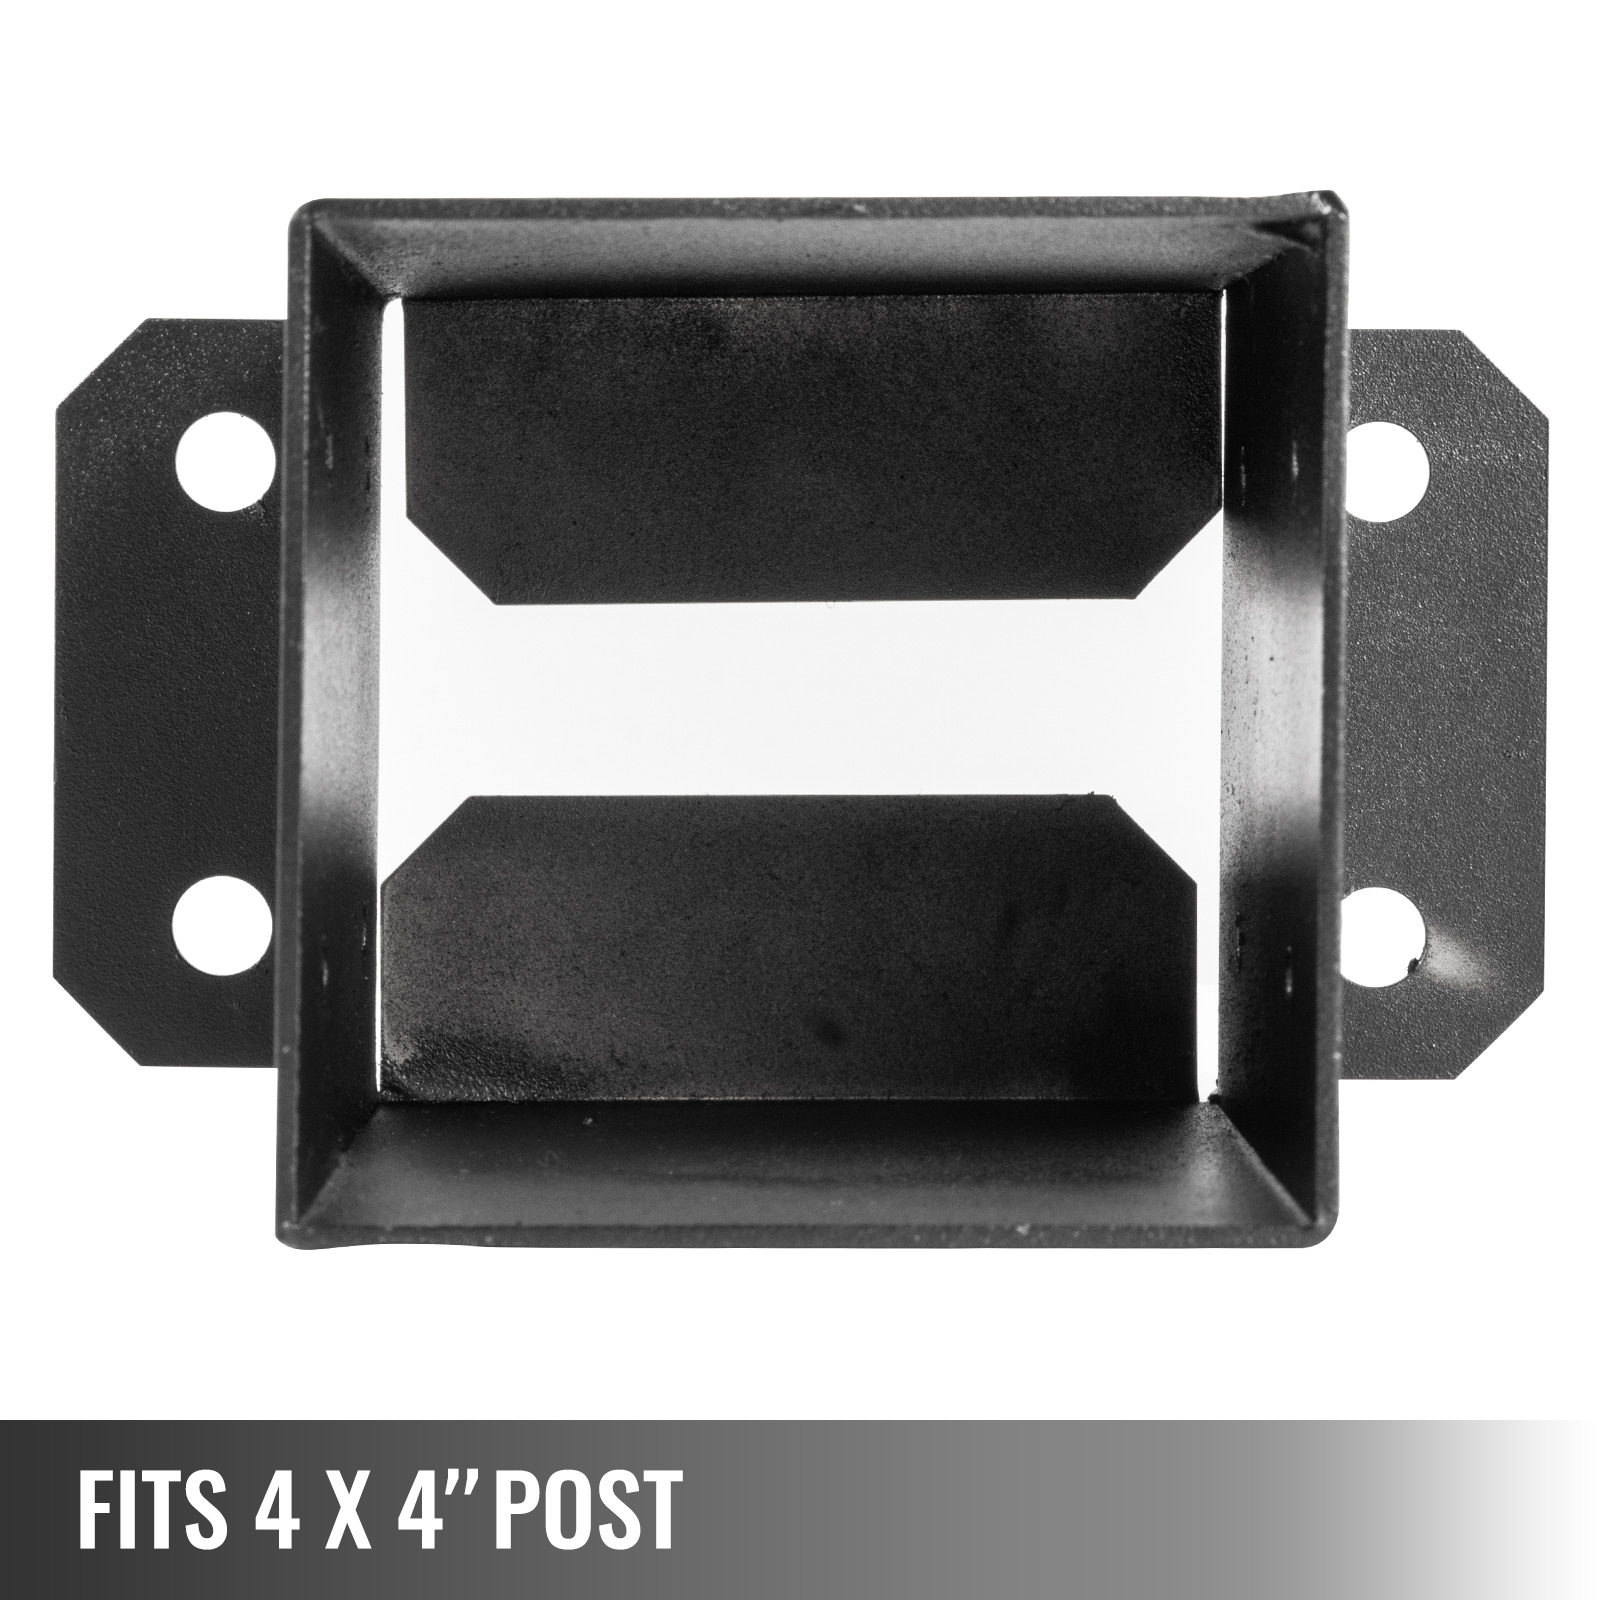 BENTISM 4 x 4 Post Base 5 PCS, Deck Post Base 3.6 x 3.6 inch, Post Bracket 2.5 LBS, Fence Post Anchor Black Powder-Coated Deck Post Base with Thick Steel for Deck Supports Porch Railing Post Holders - image 4 of 9